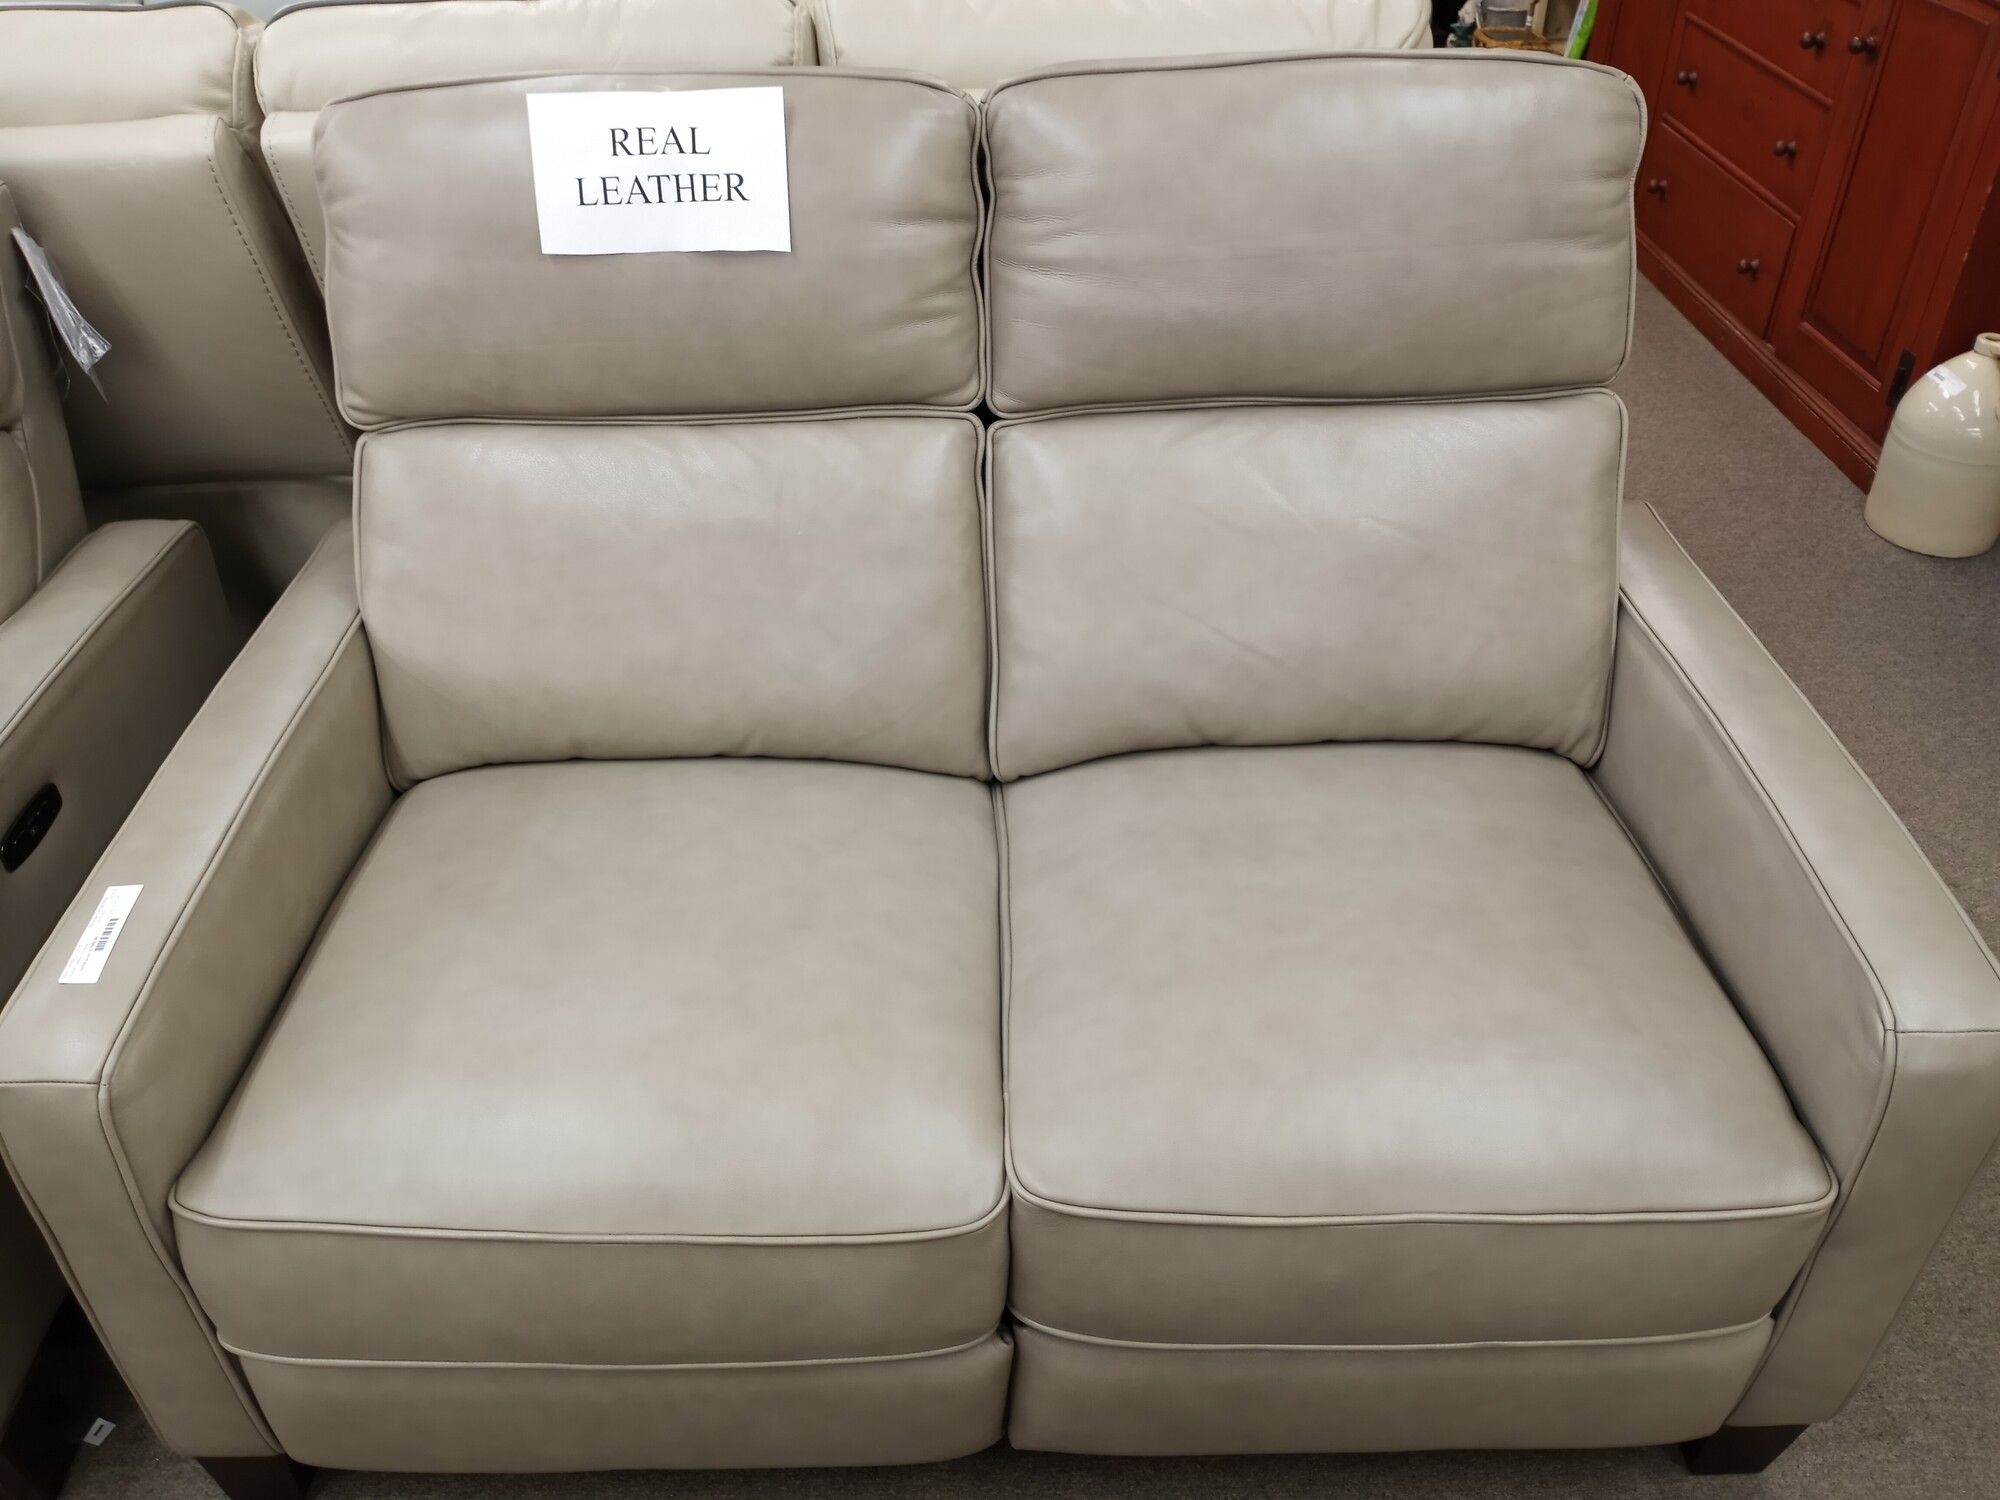 Power Leather Loveseat matching sofas available too!